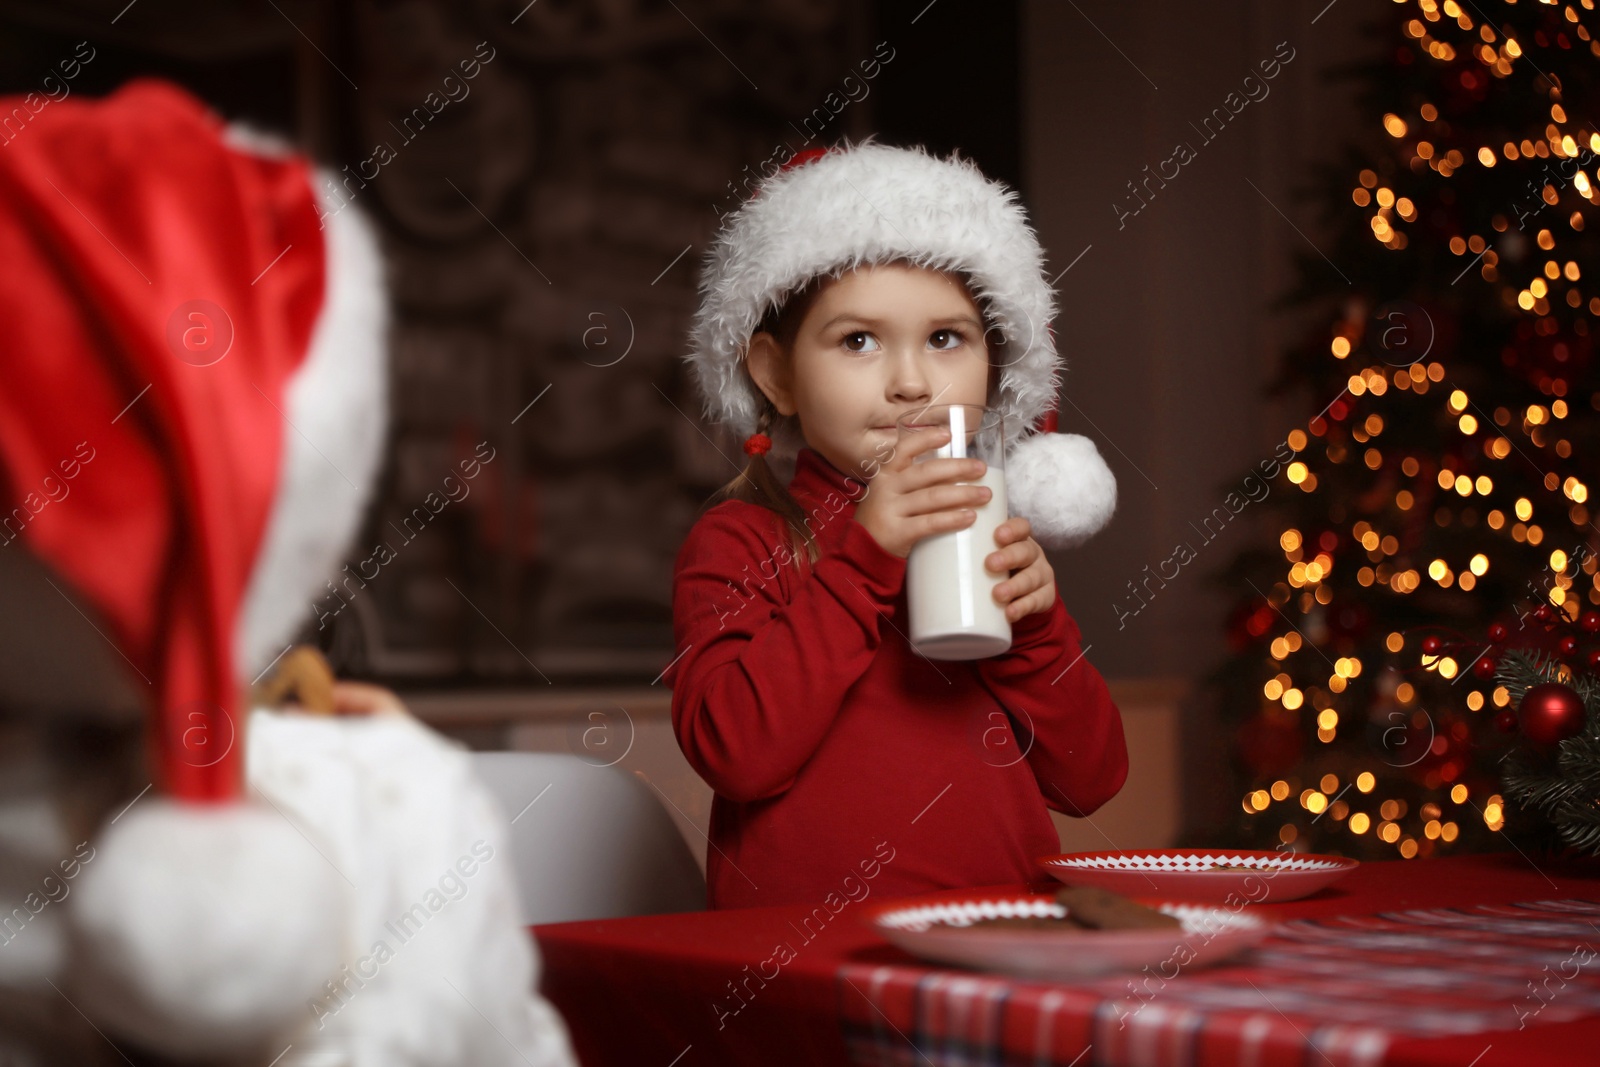 Photo of Cute little child with glass of milk at table in dining room. Christmas time